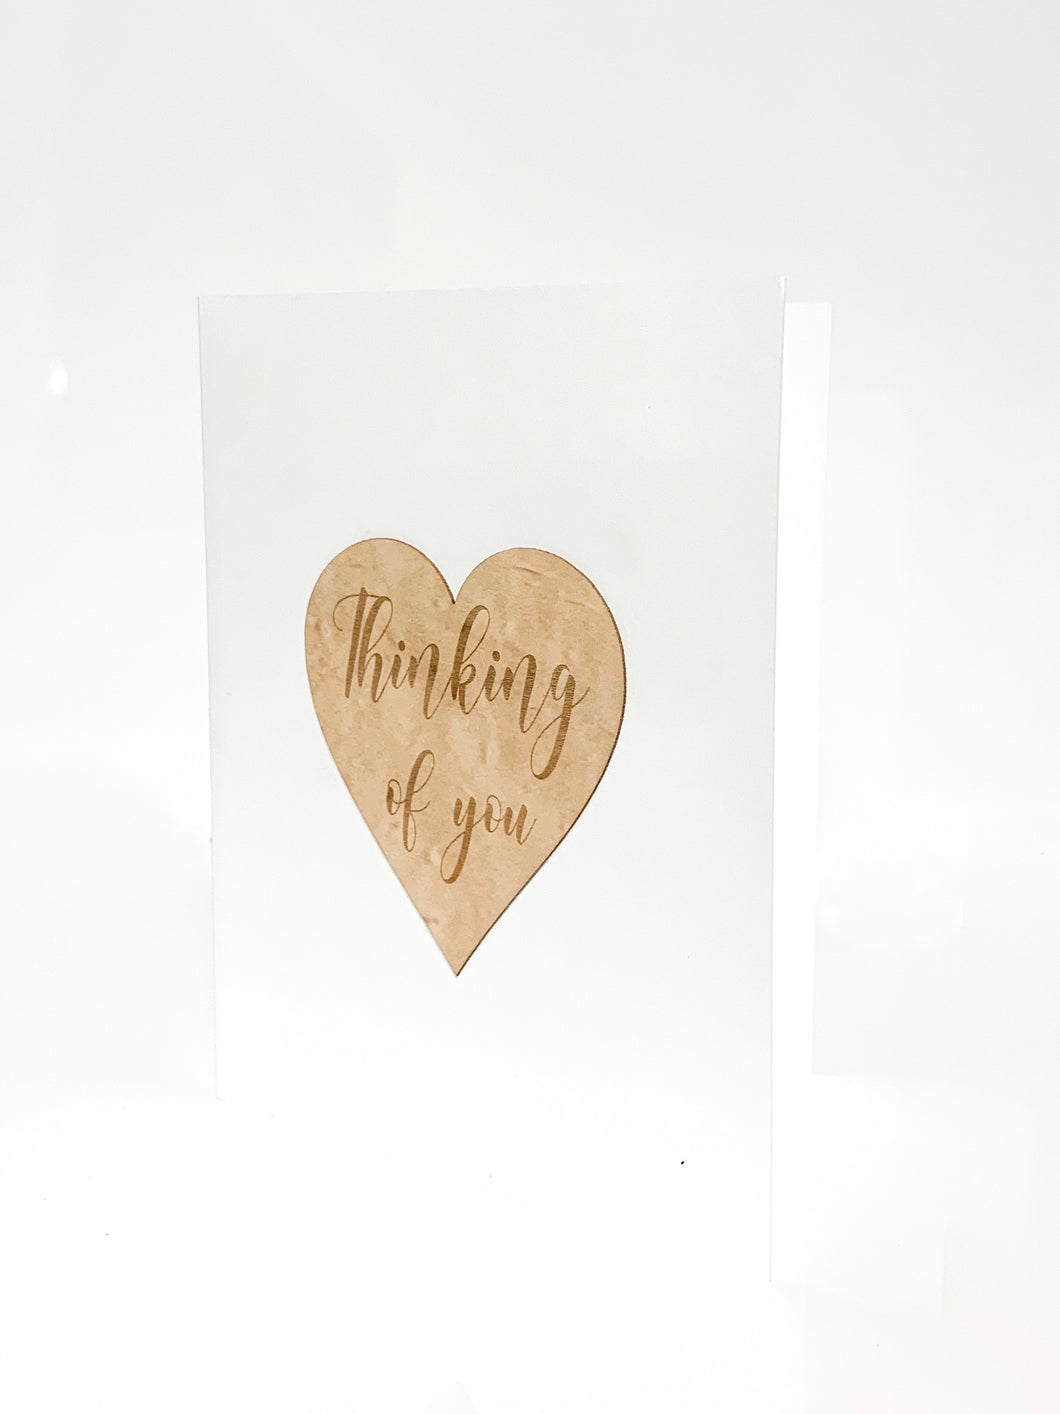 Thinking of you - heart wooden greeting card